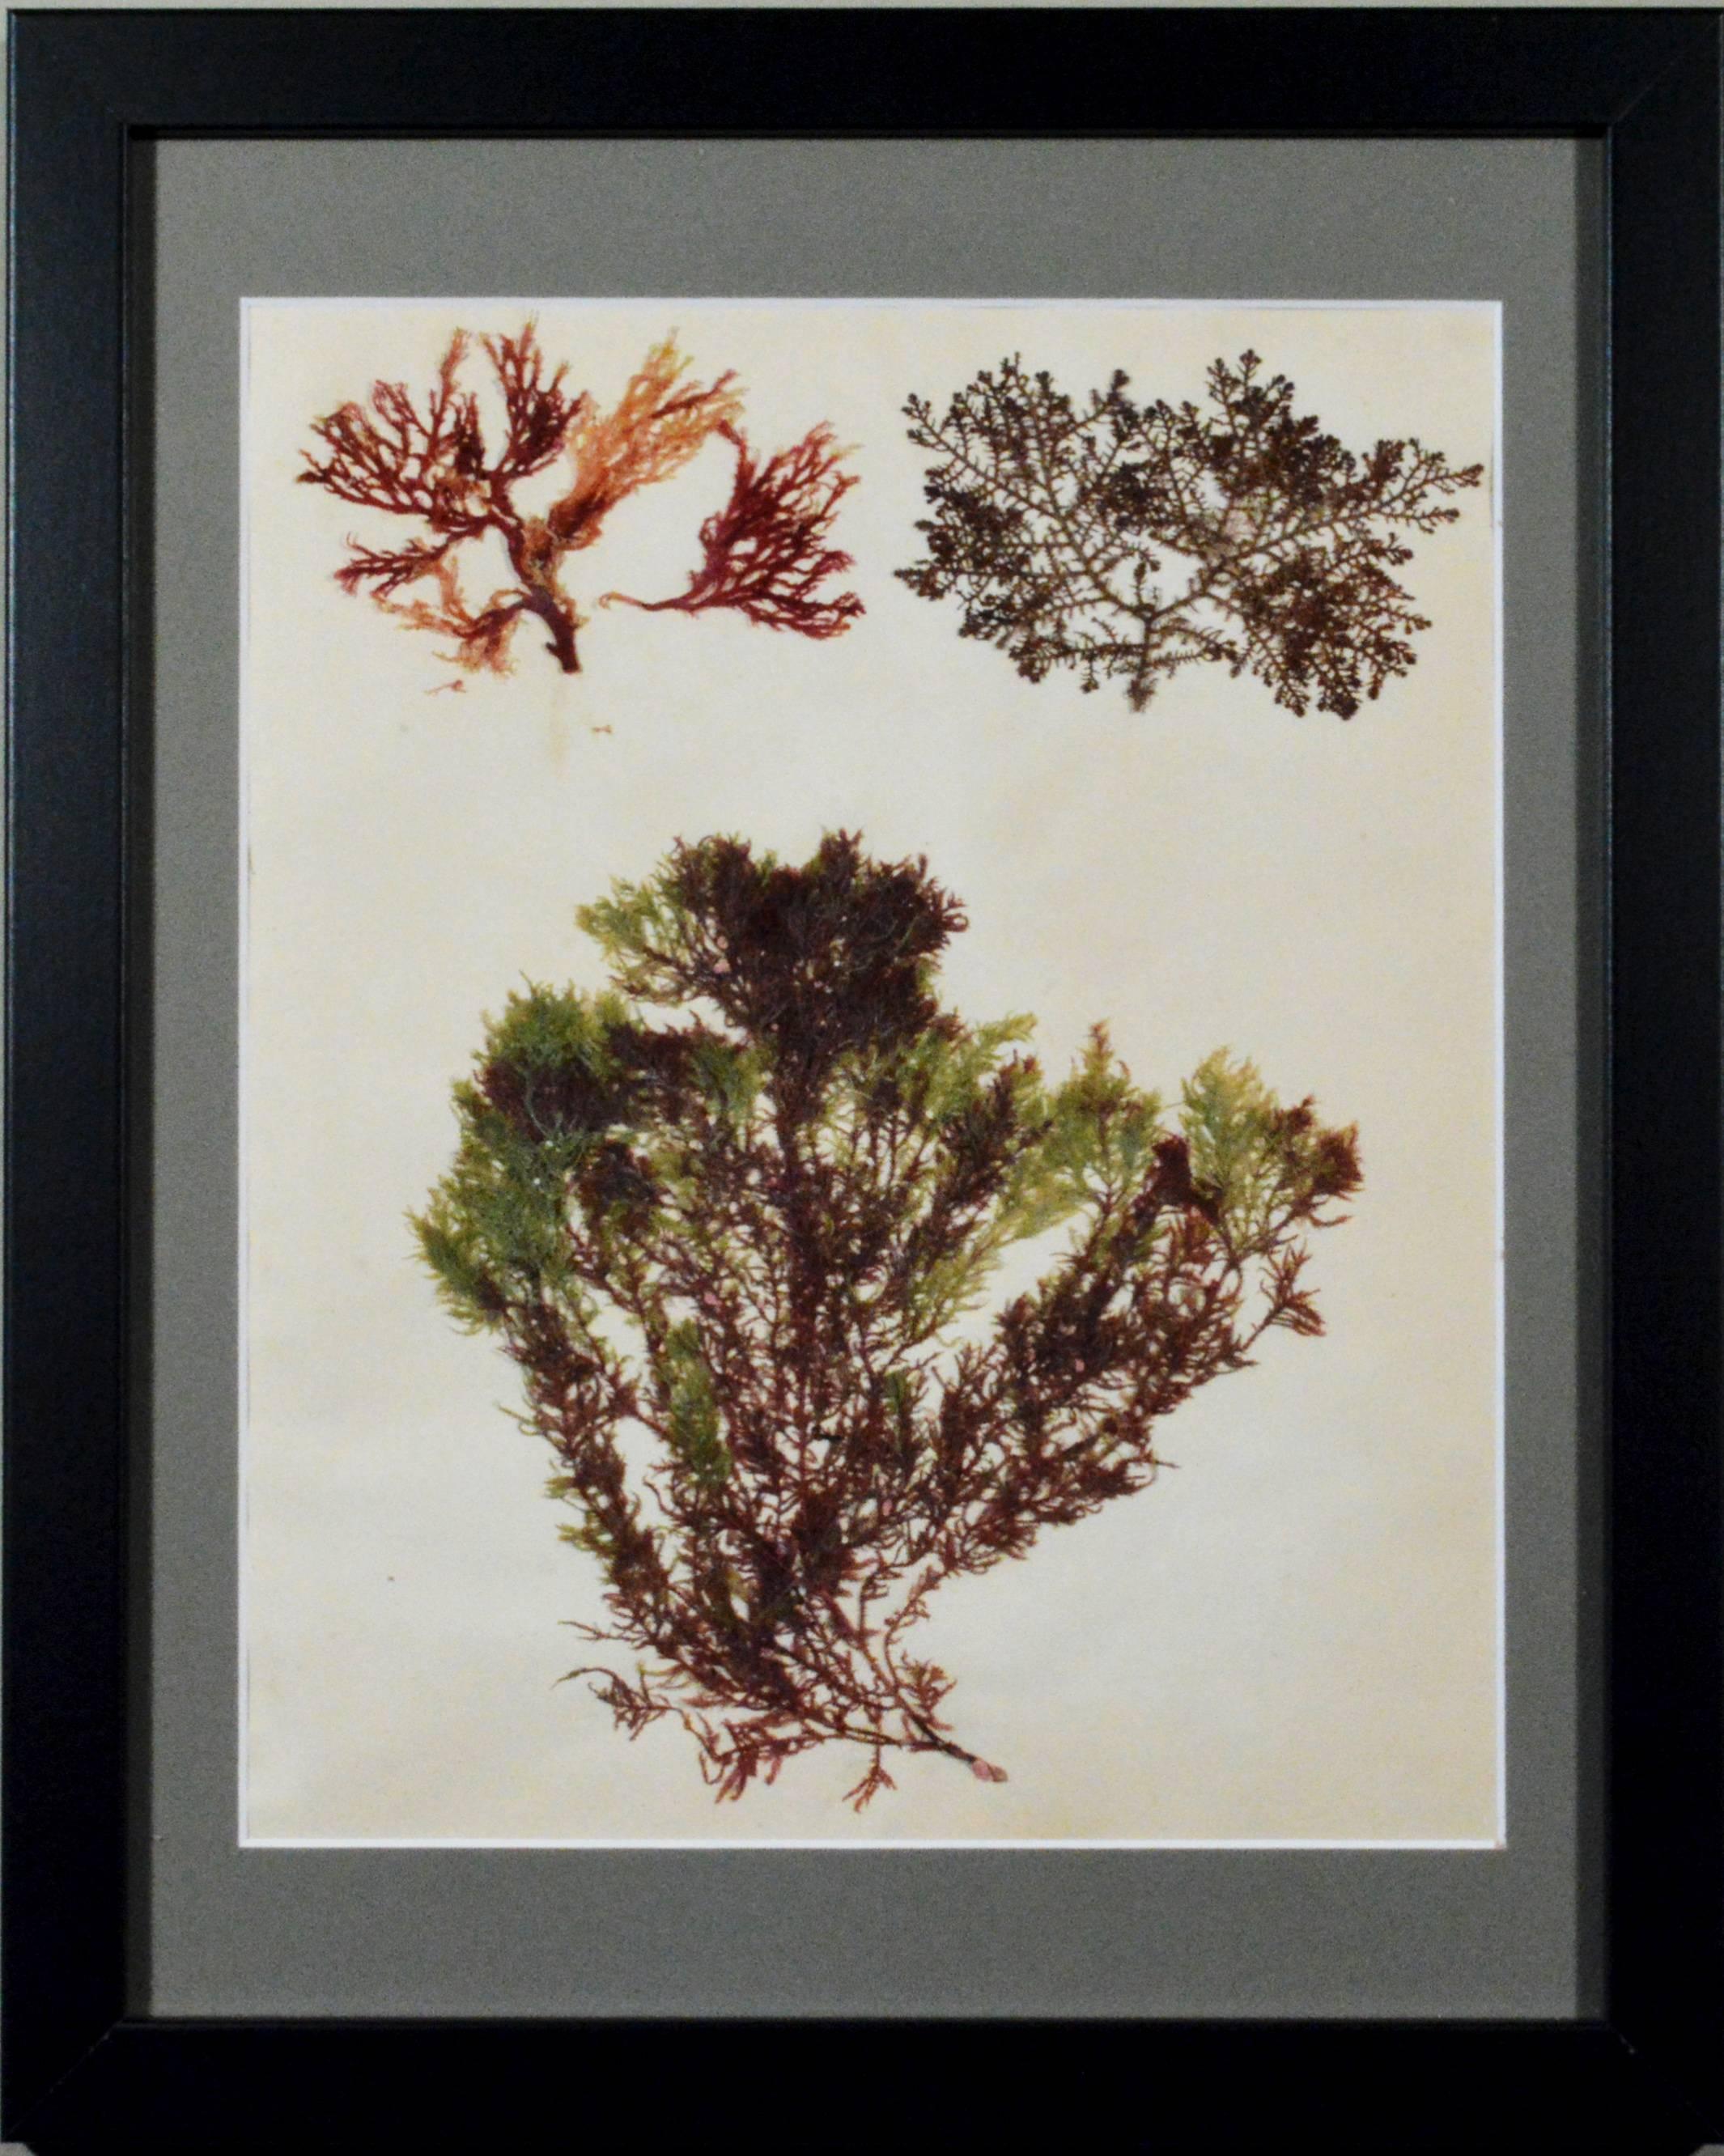 Victorian Ladies' pressed seaweed pictures, 
circa 1885

The six different pictures from a group of nineteen consist of groups of seaweed arranged on paper in an artistic manner and now framed in simple black frames. Biologists pressed samples of